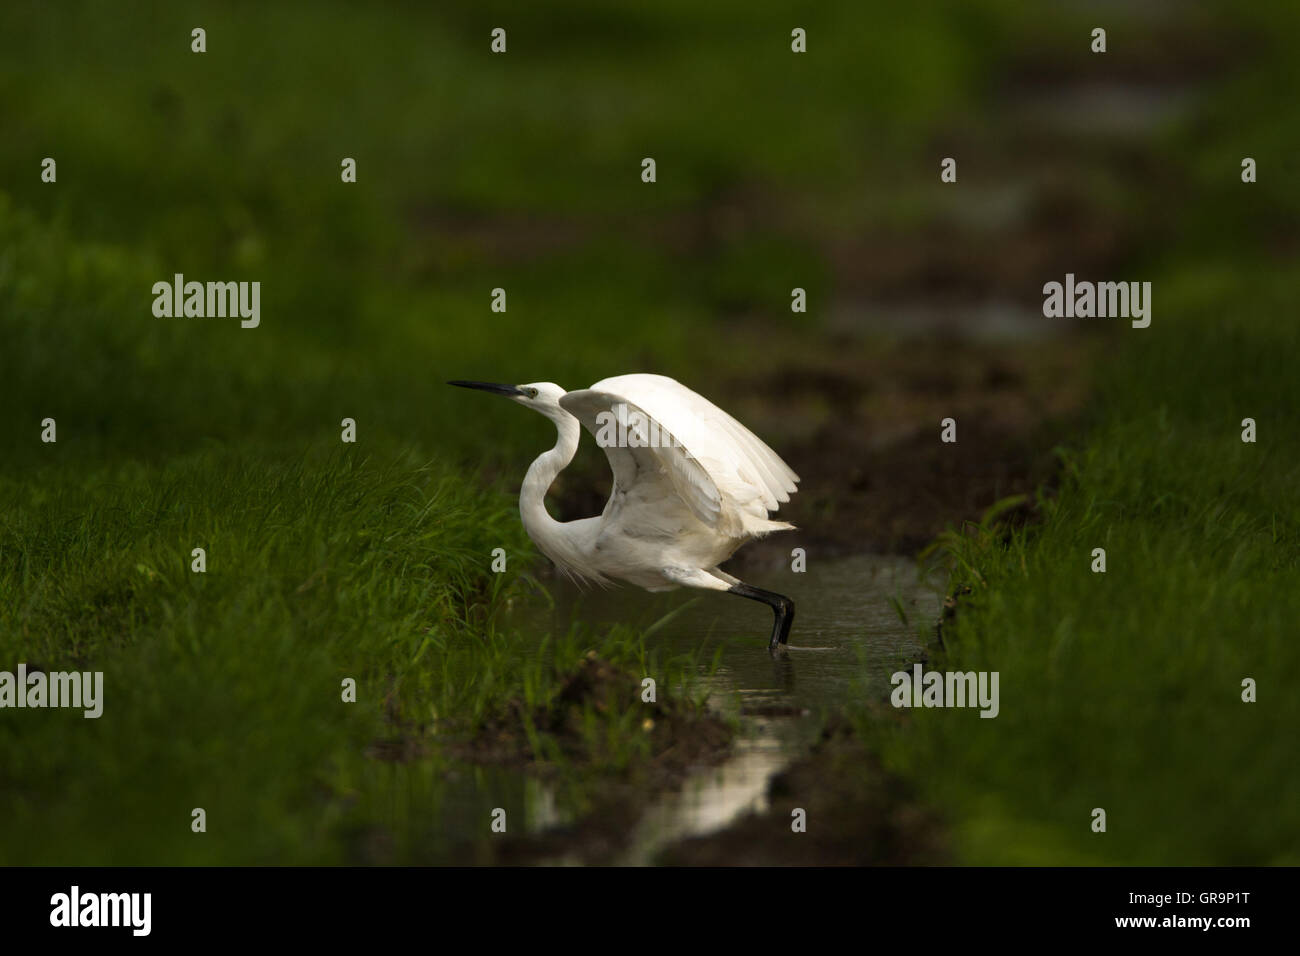 The Little Egret just about to fly being all alert in the fields of Uran near Mumbai during rain Stock Photo